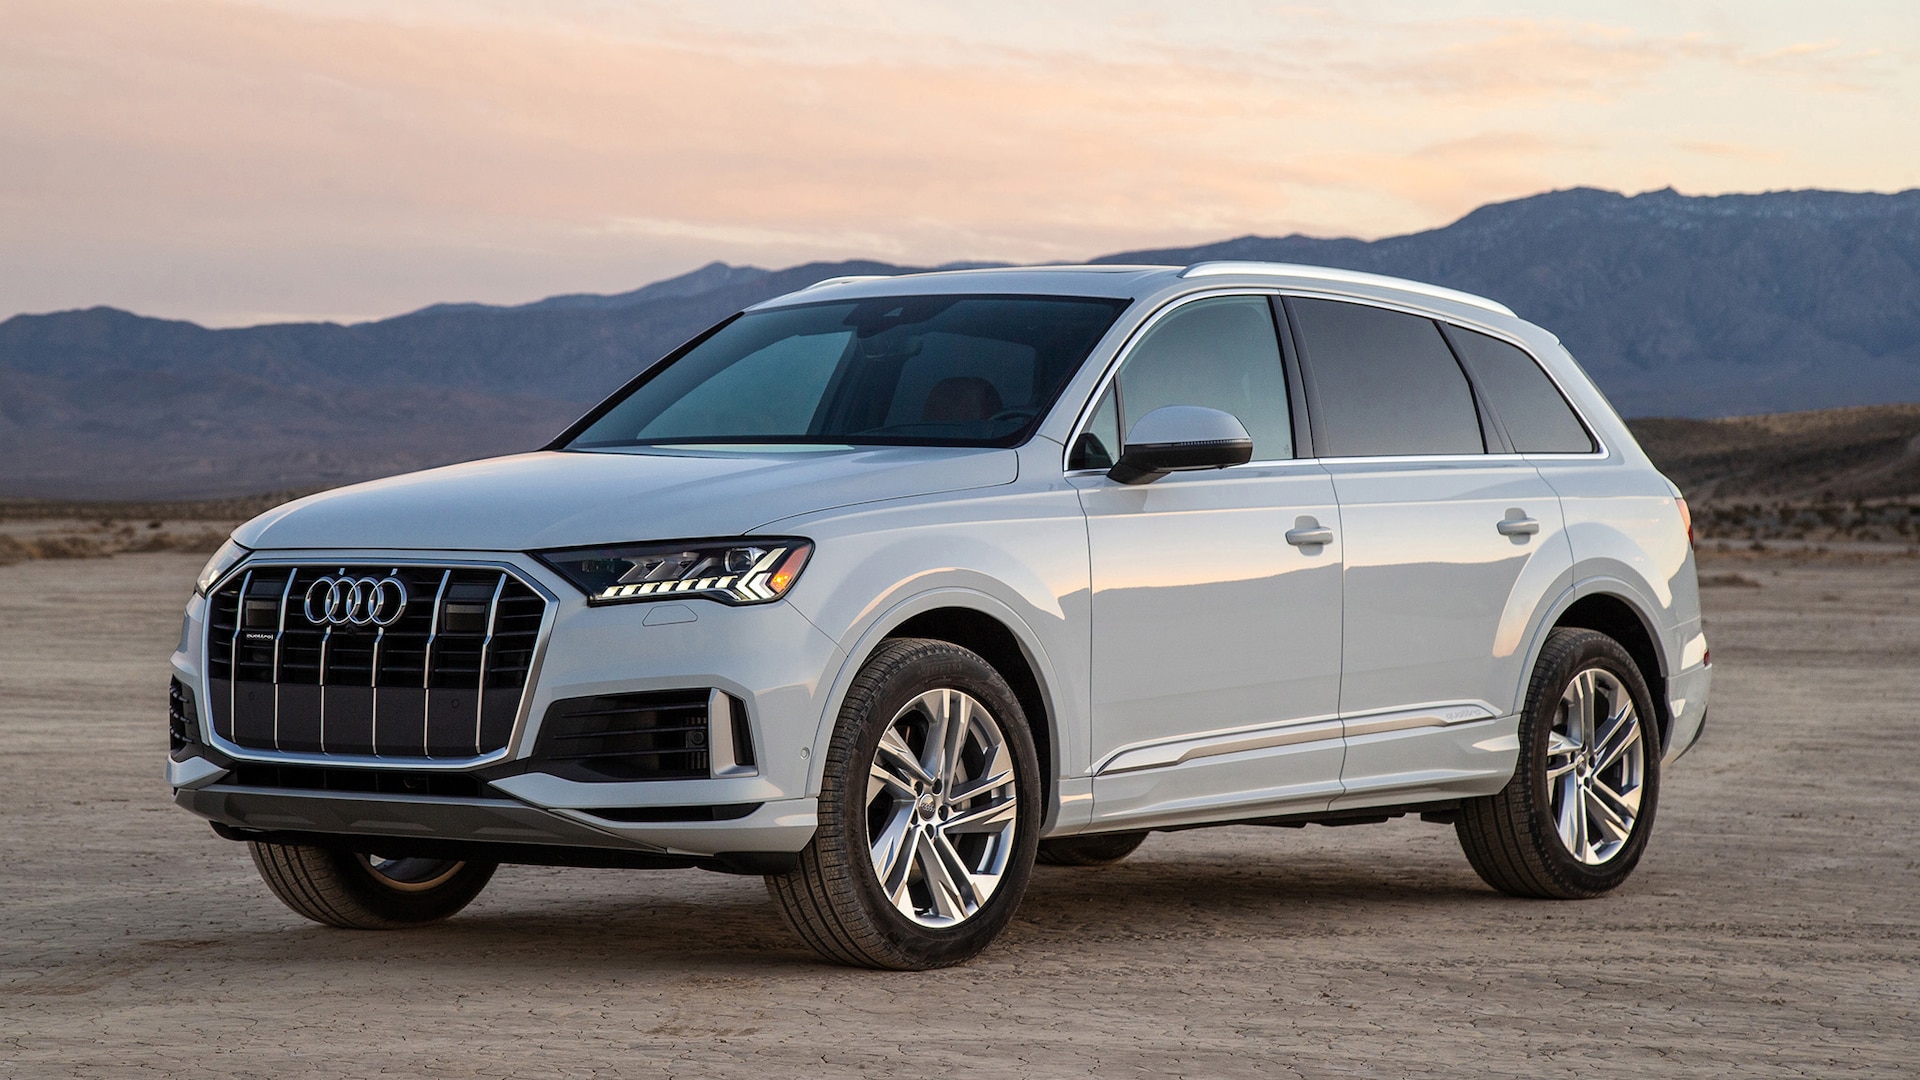 2022 Audi Q7 Prices, Reviews, and Photos - MotorTrend